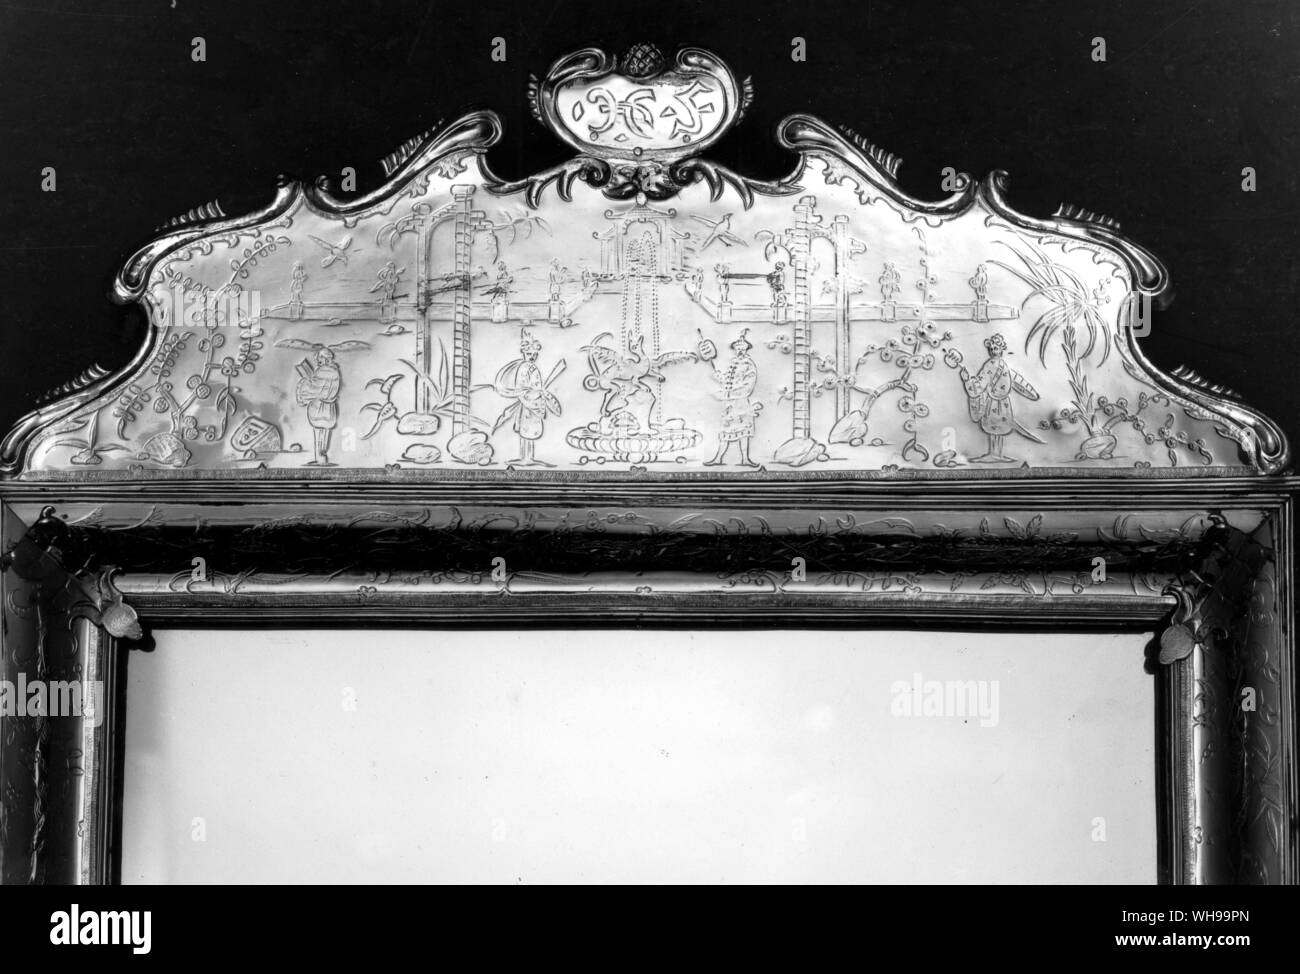 Cresting of a silver toilet mirror c.1680 by Robert Smythier with pre-rococo-chinoiserie scenes Stock Photo